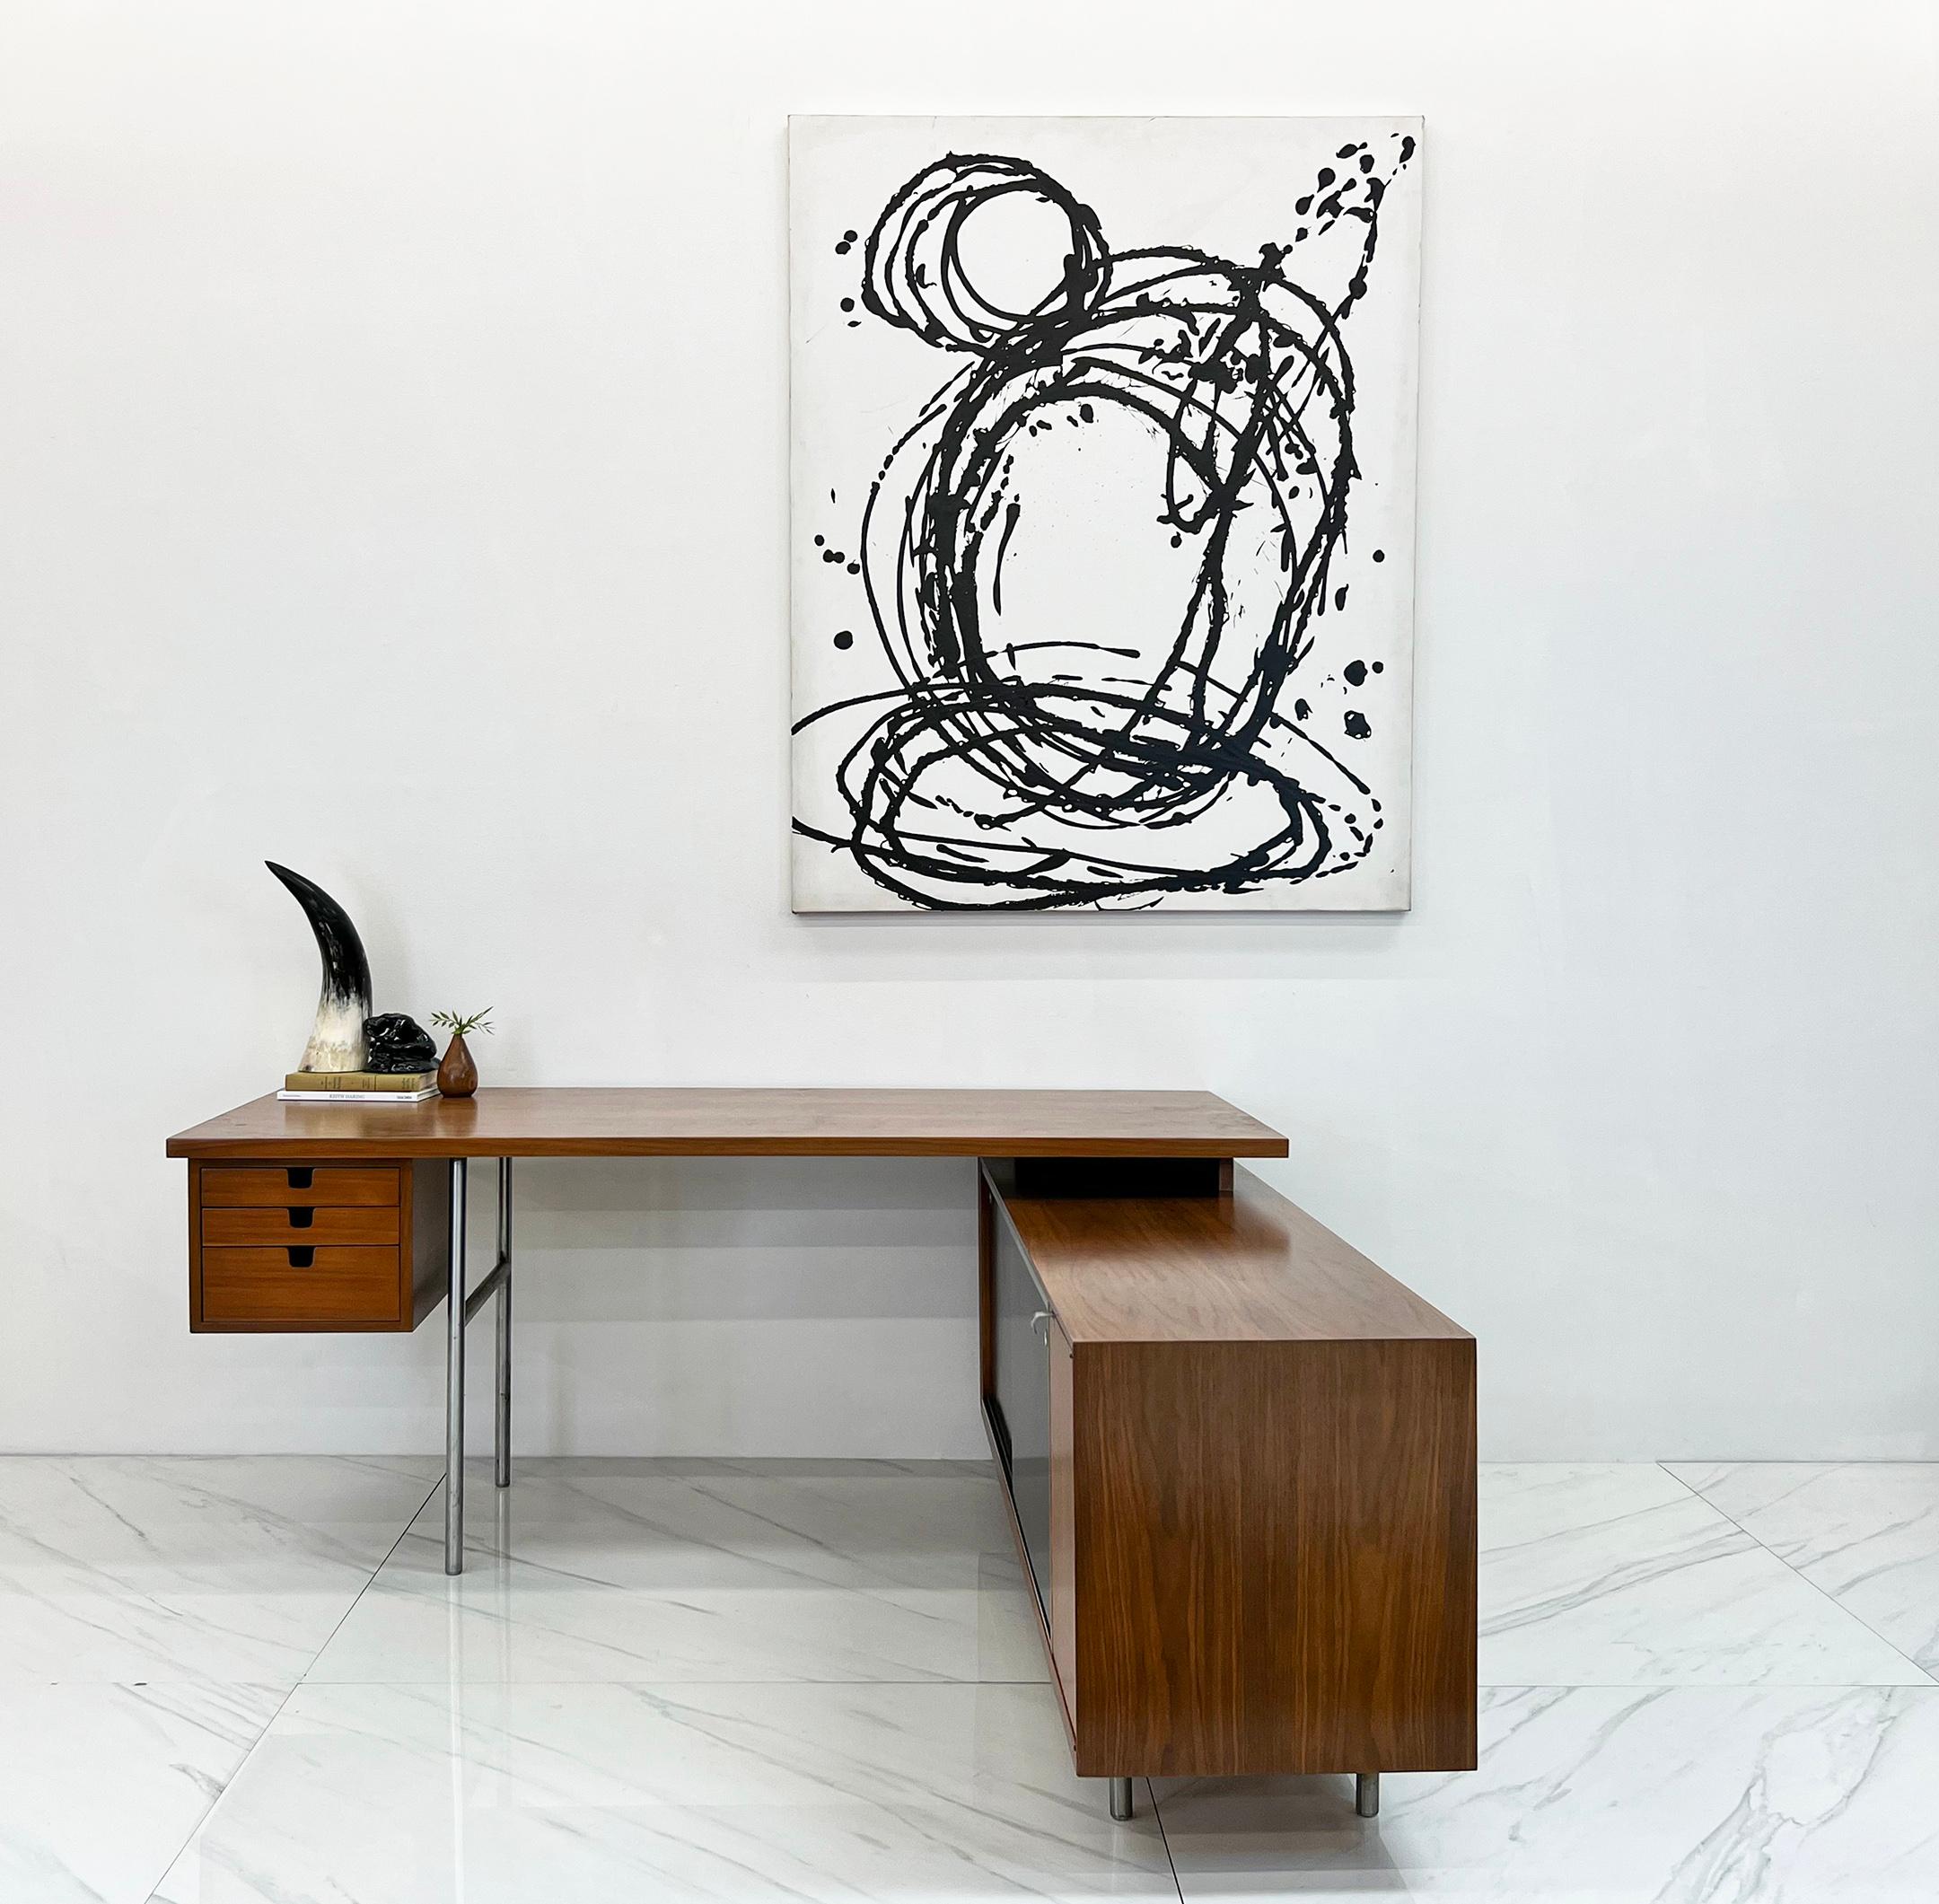 Available right now we have this absolutely stunning Mid-Century Modern desk designed by George Nelson for Herman Miller. The Executive Office Group, NO 8000 Series designed in 1949 by George Nelson were the perfect marriage of form, function, and